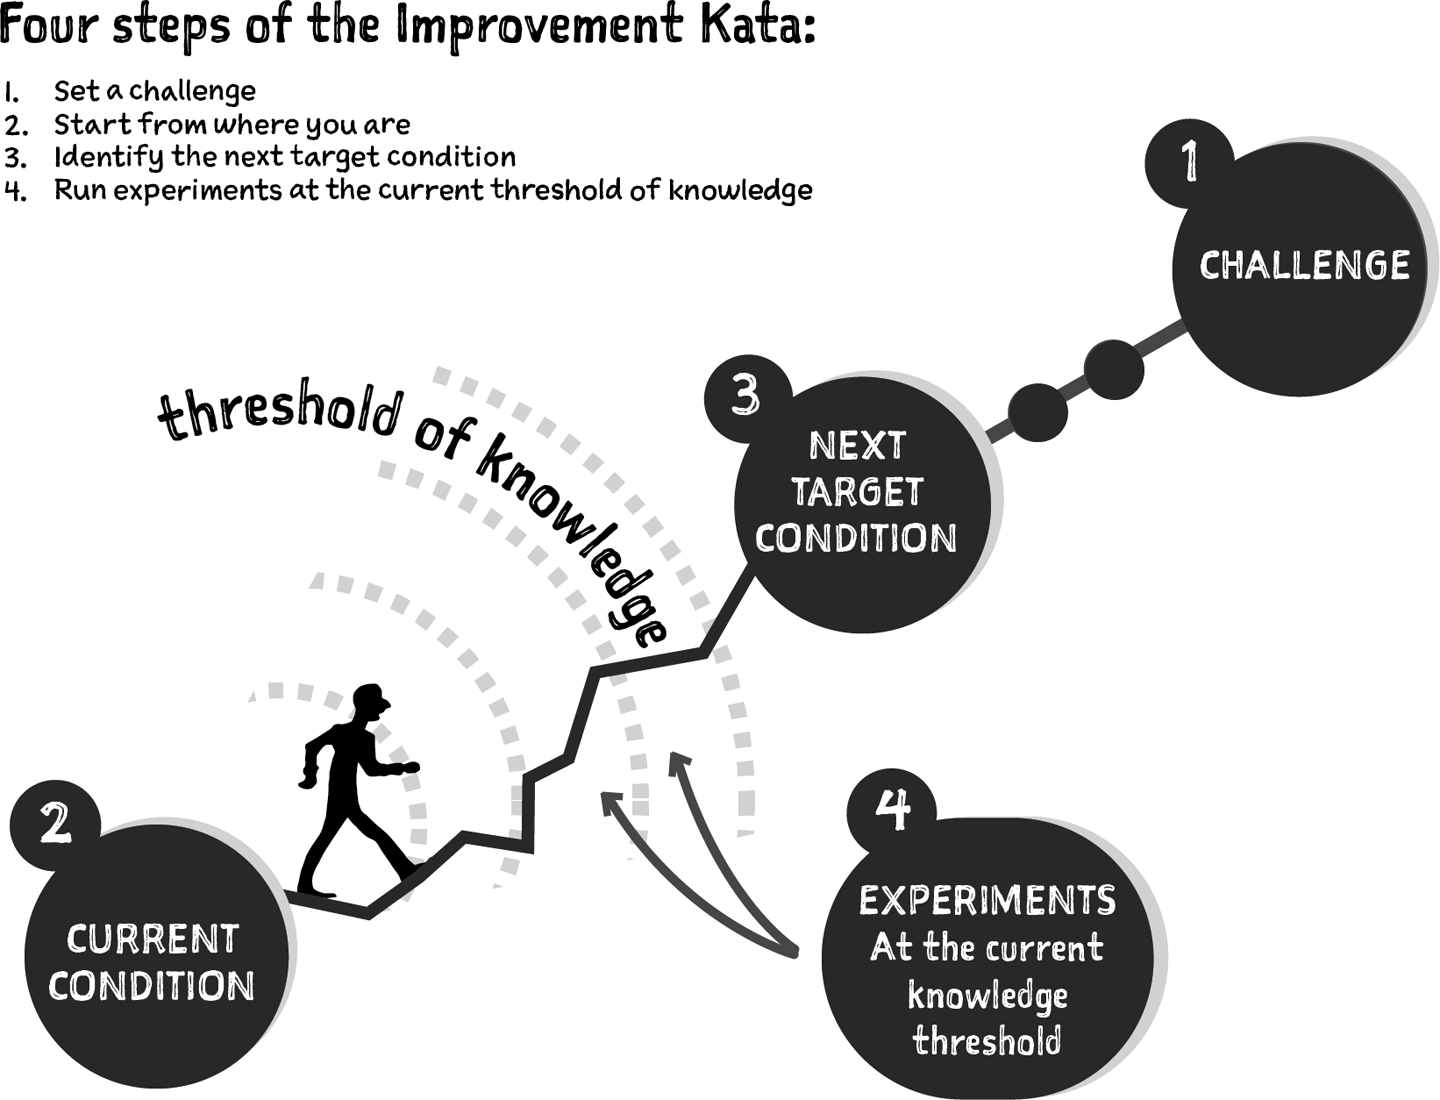 The Improvement Kata by Mike Rother (Source: Kata slides and graphics)